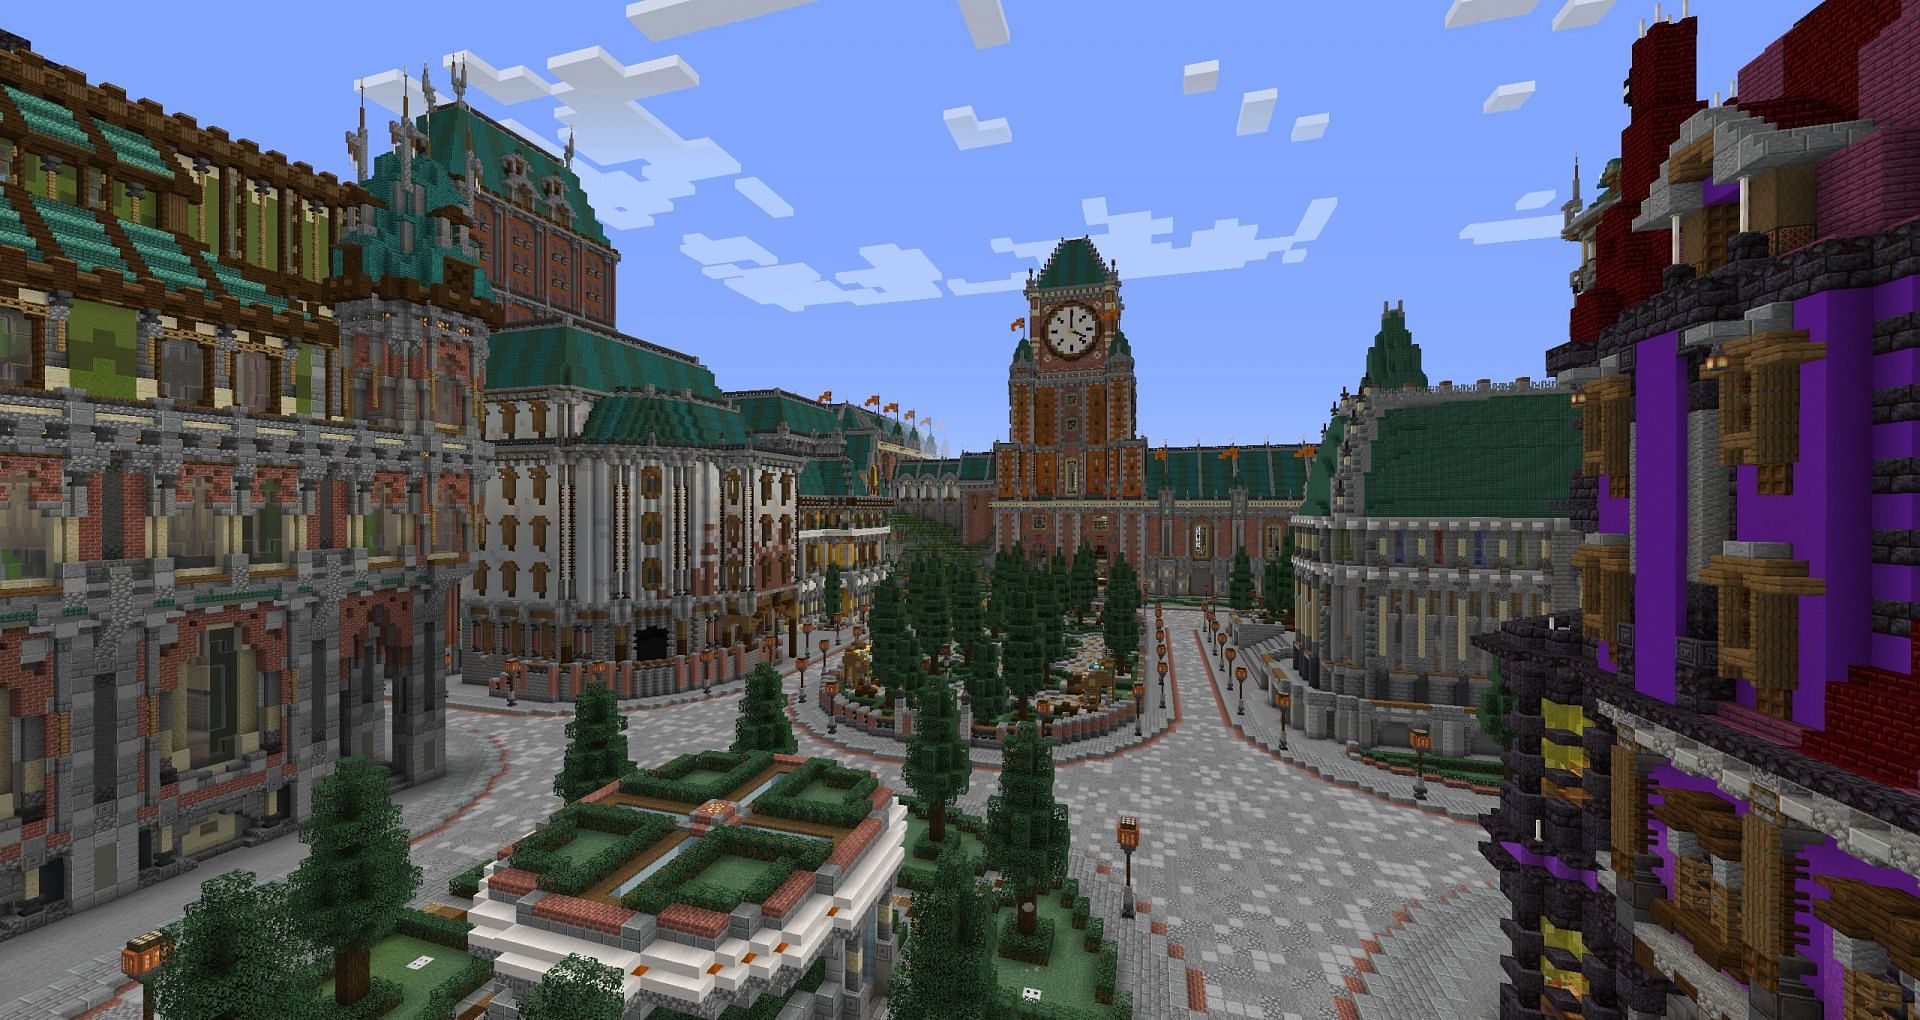 Project City build is a long standing Minecraft server, with over 10 years of history (Image via Reddit)